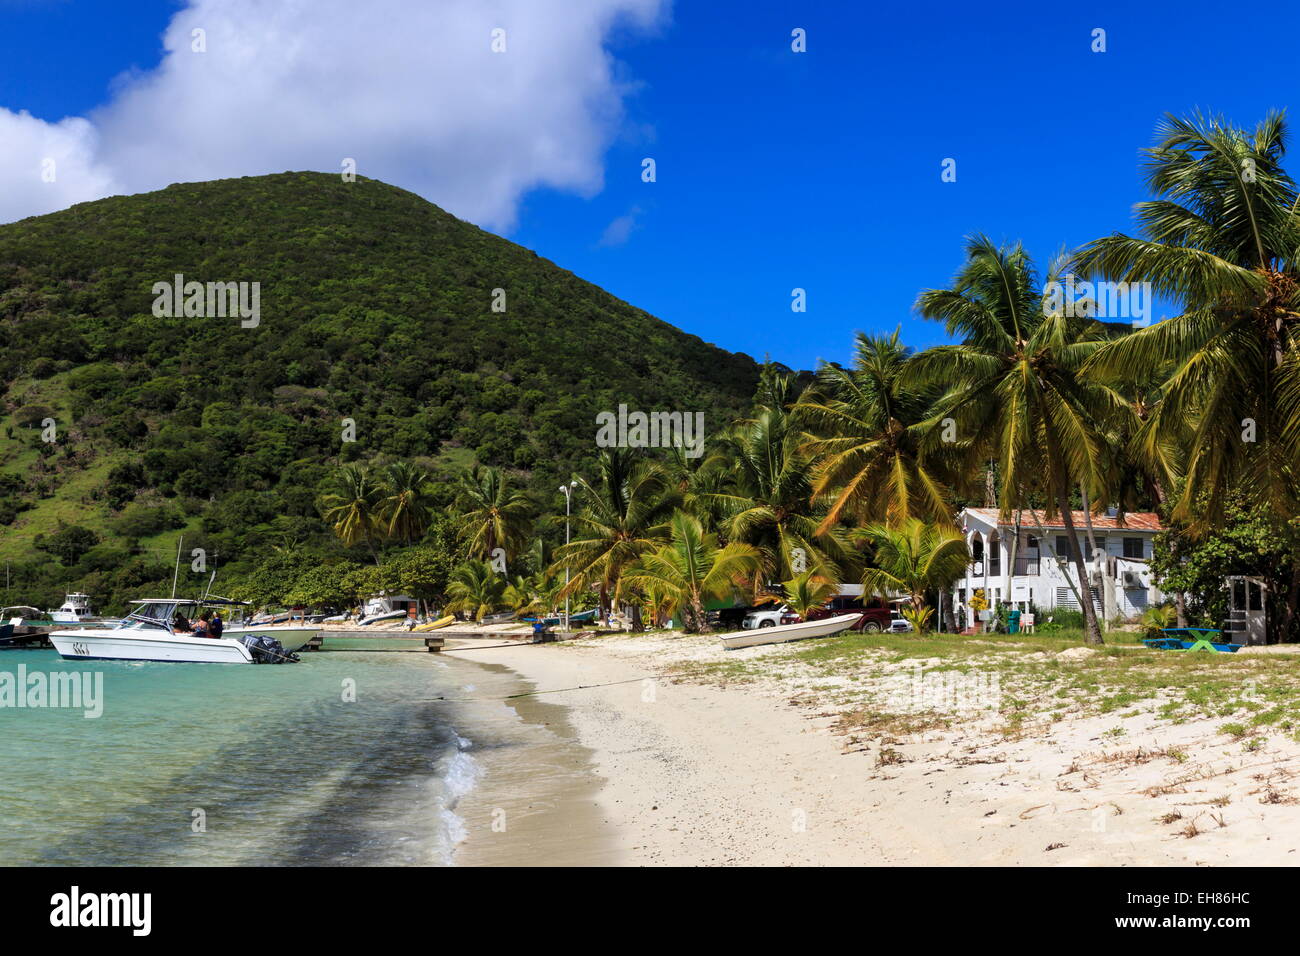 Police station on beach, green hill and palm trees, Great Harbour, Jost Van Dyke, British Virgin Islands, West Indies, Caribbean Stock Photo